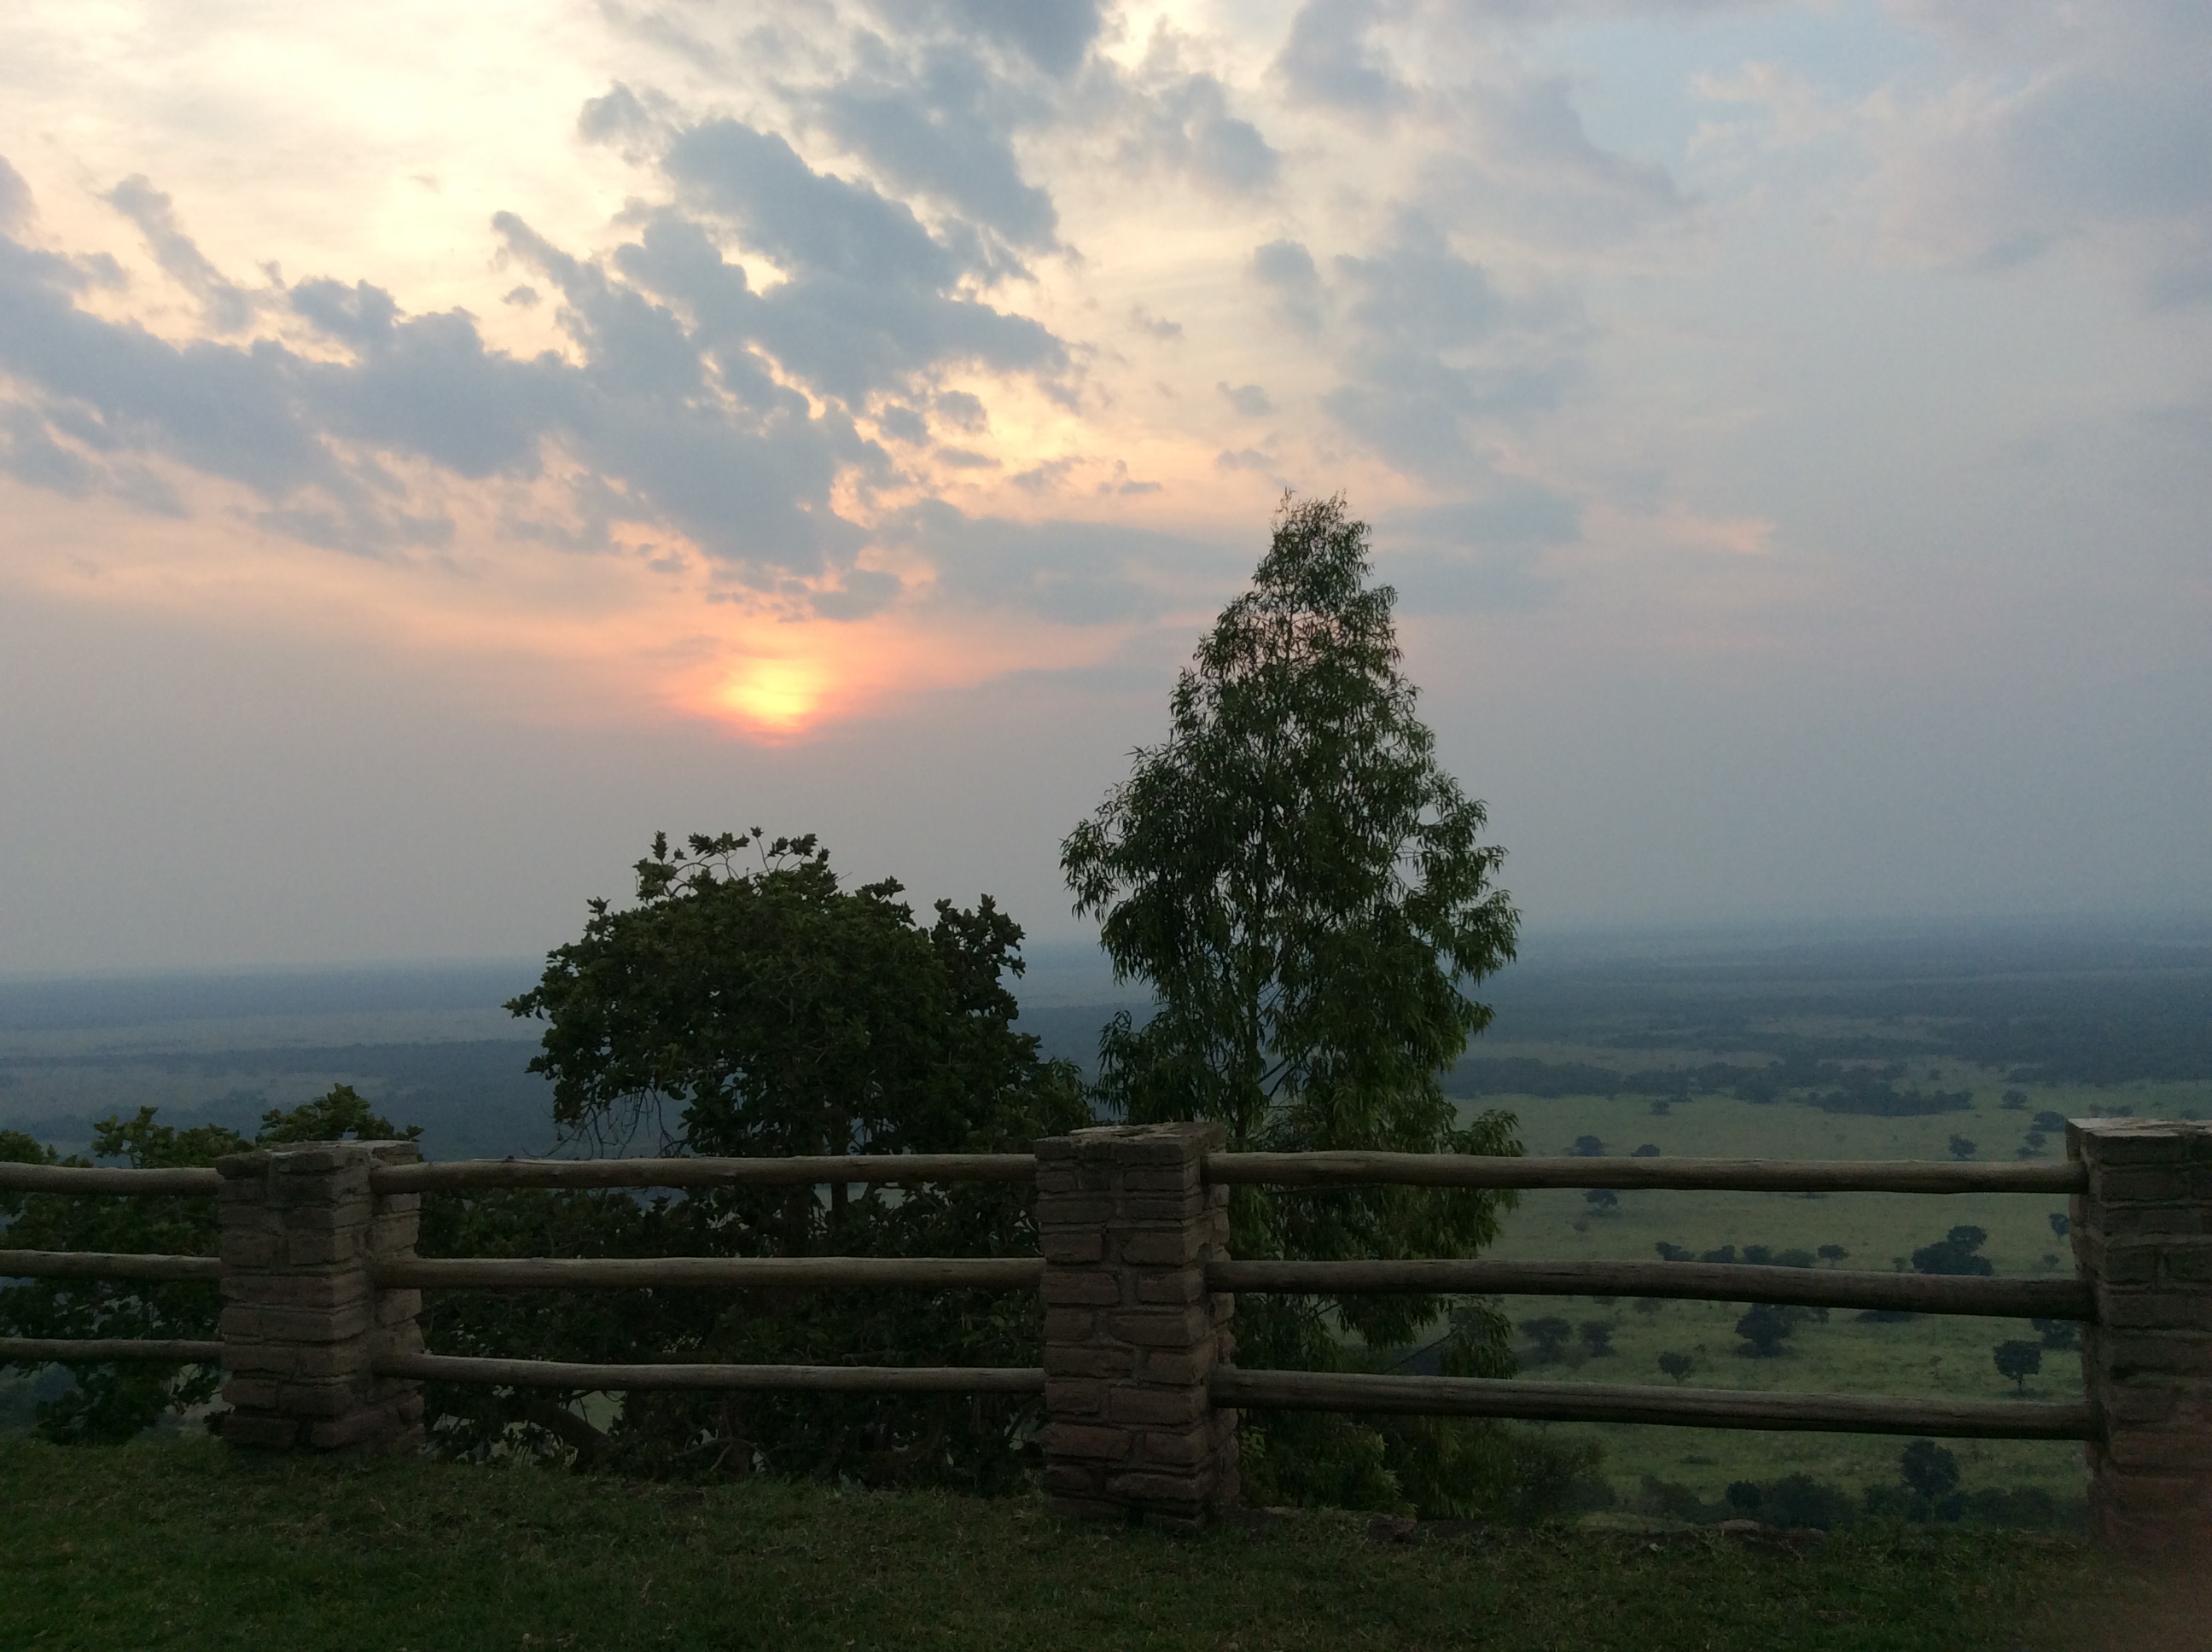 Sunset as viewed from the Rift Valley Game Lodge